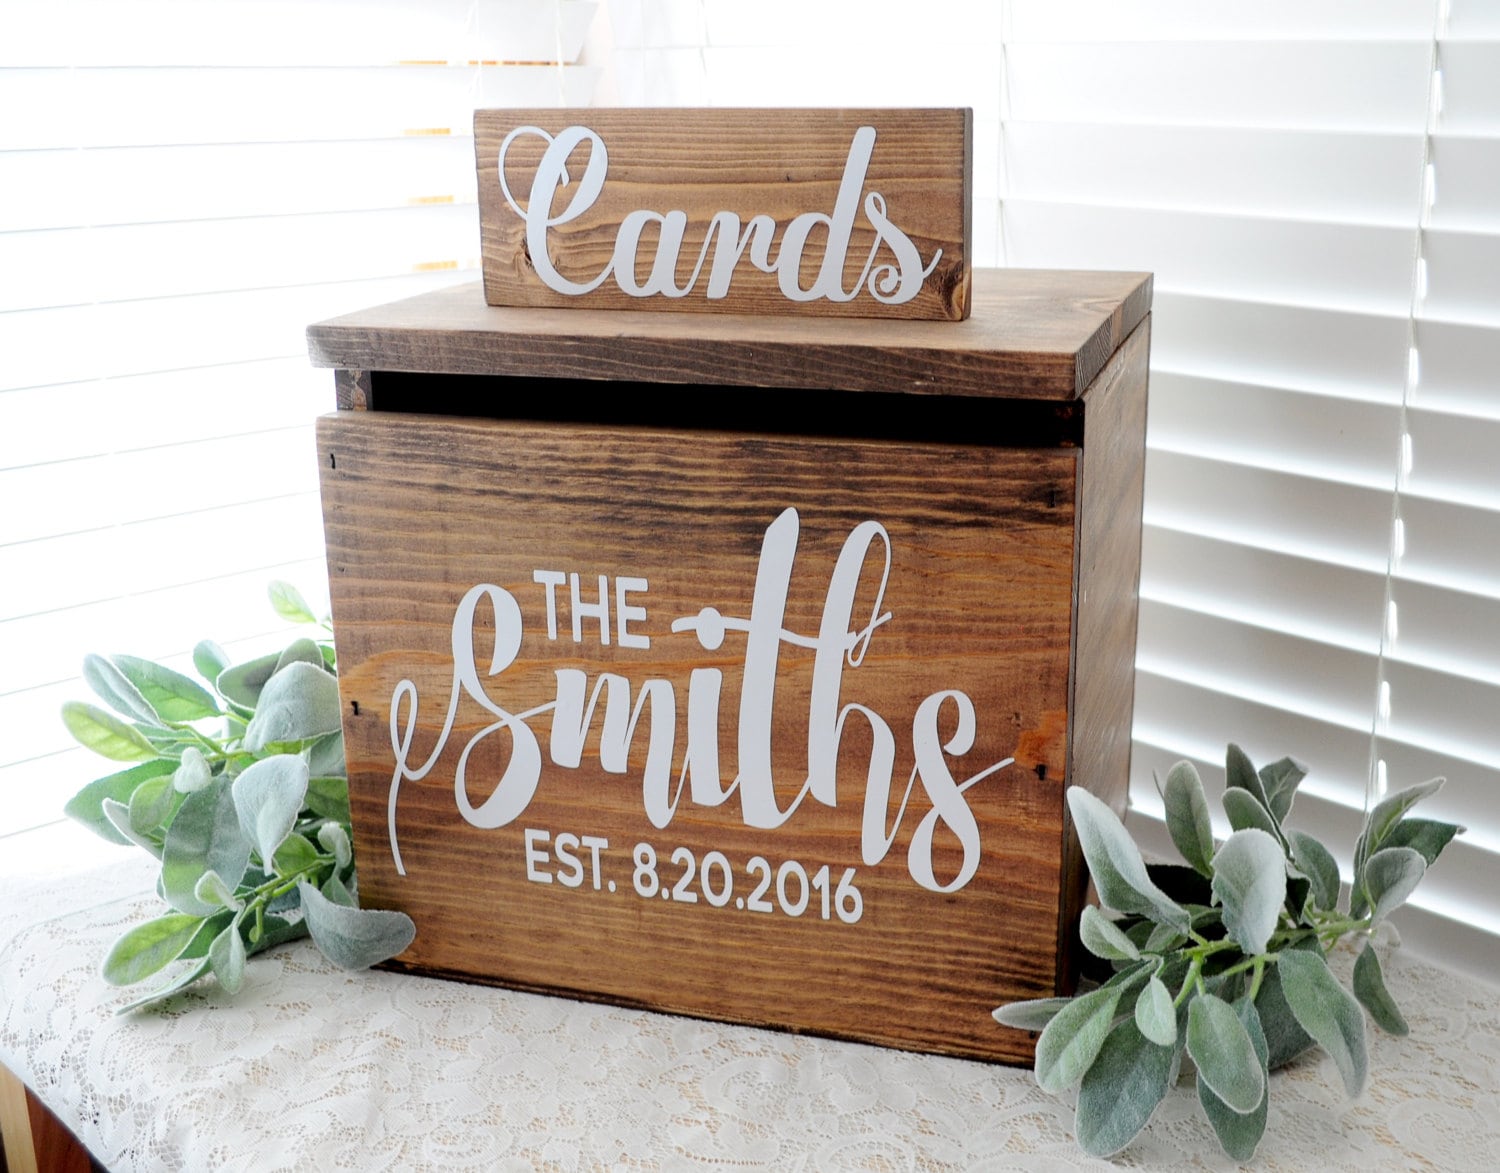 Wedding Card Box Large Rustic Personalized Card box Wooden